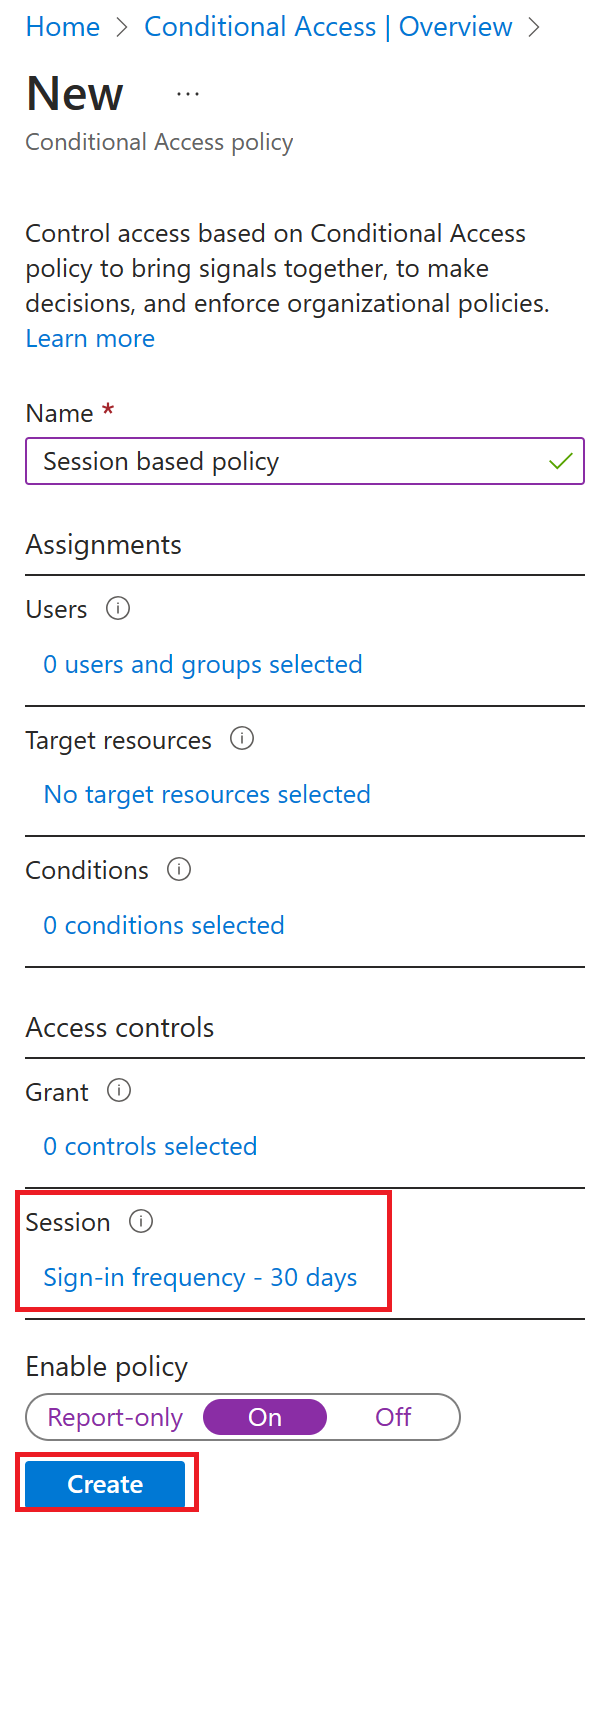 Screenshot of the new conditional access policy with policy settings highlighted.